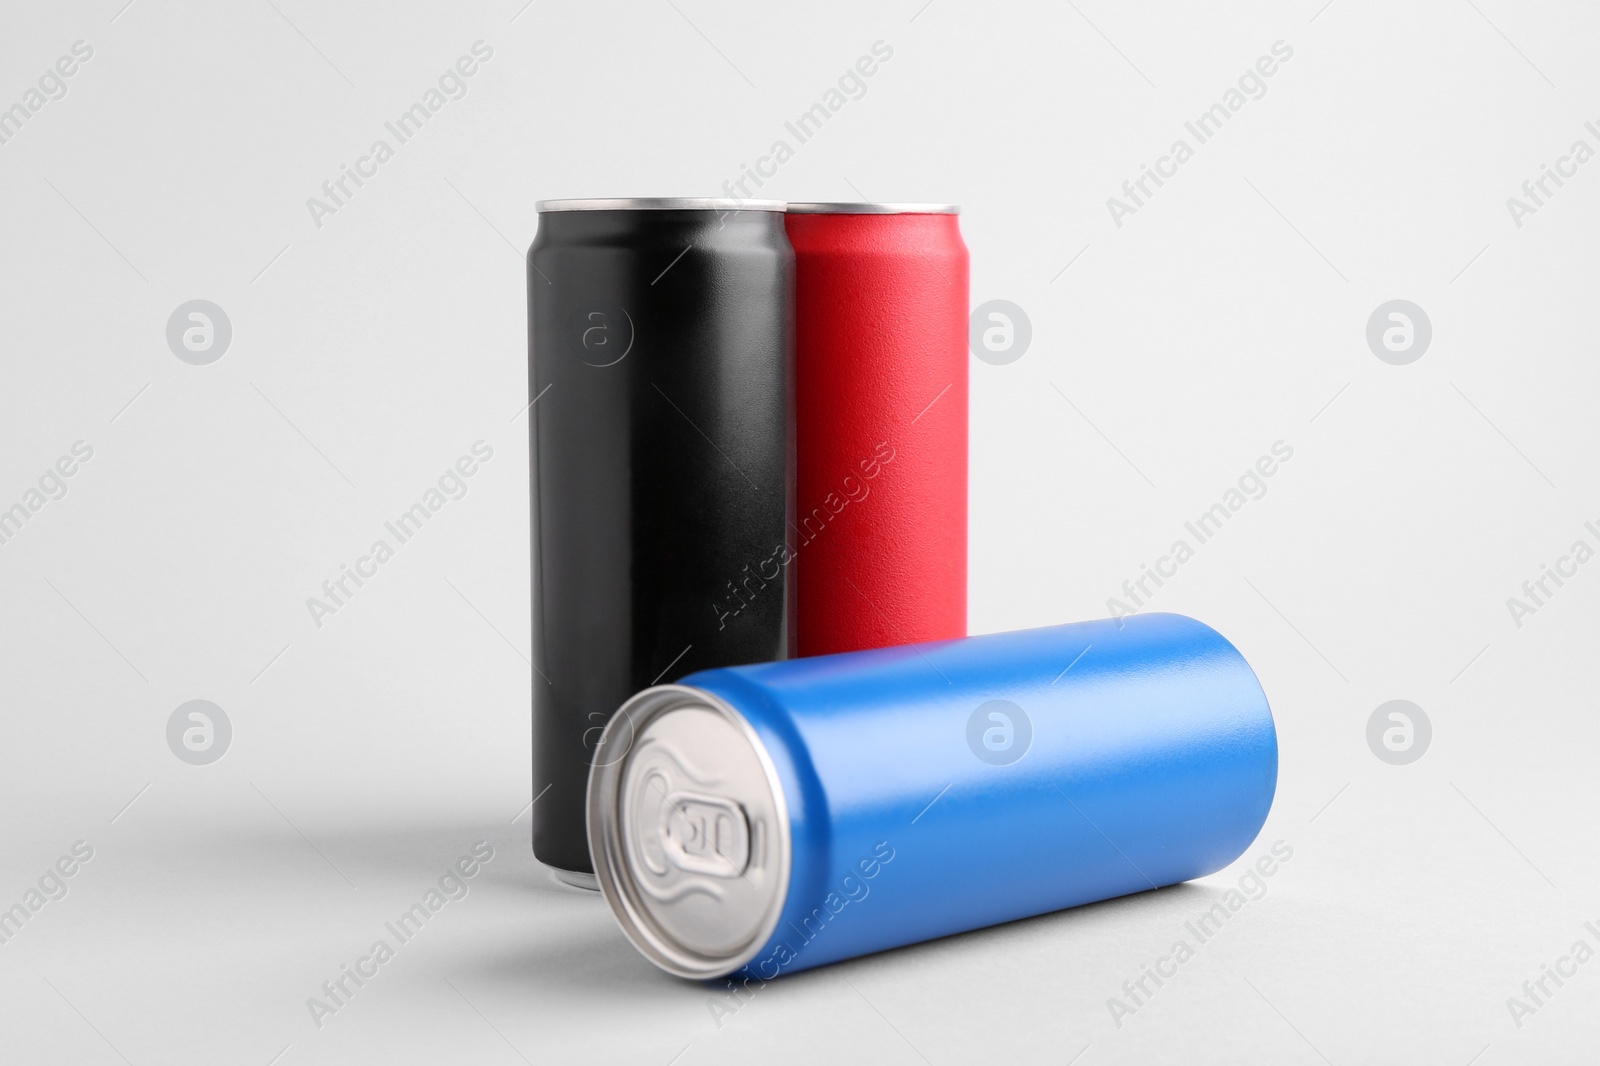 Photo of Energy drinks in colorful cans on white background